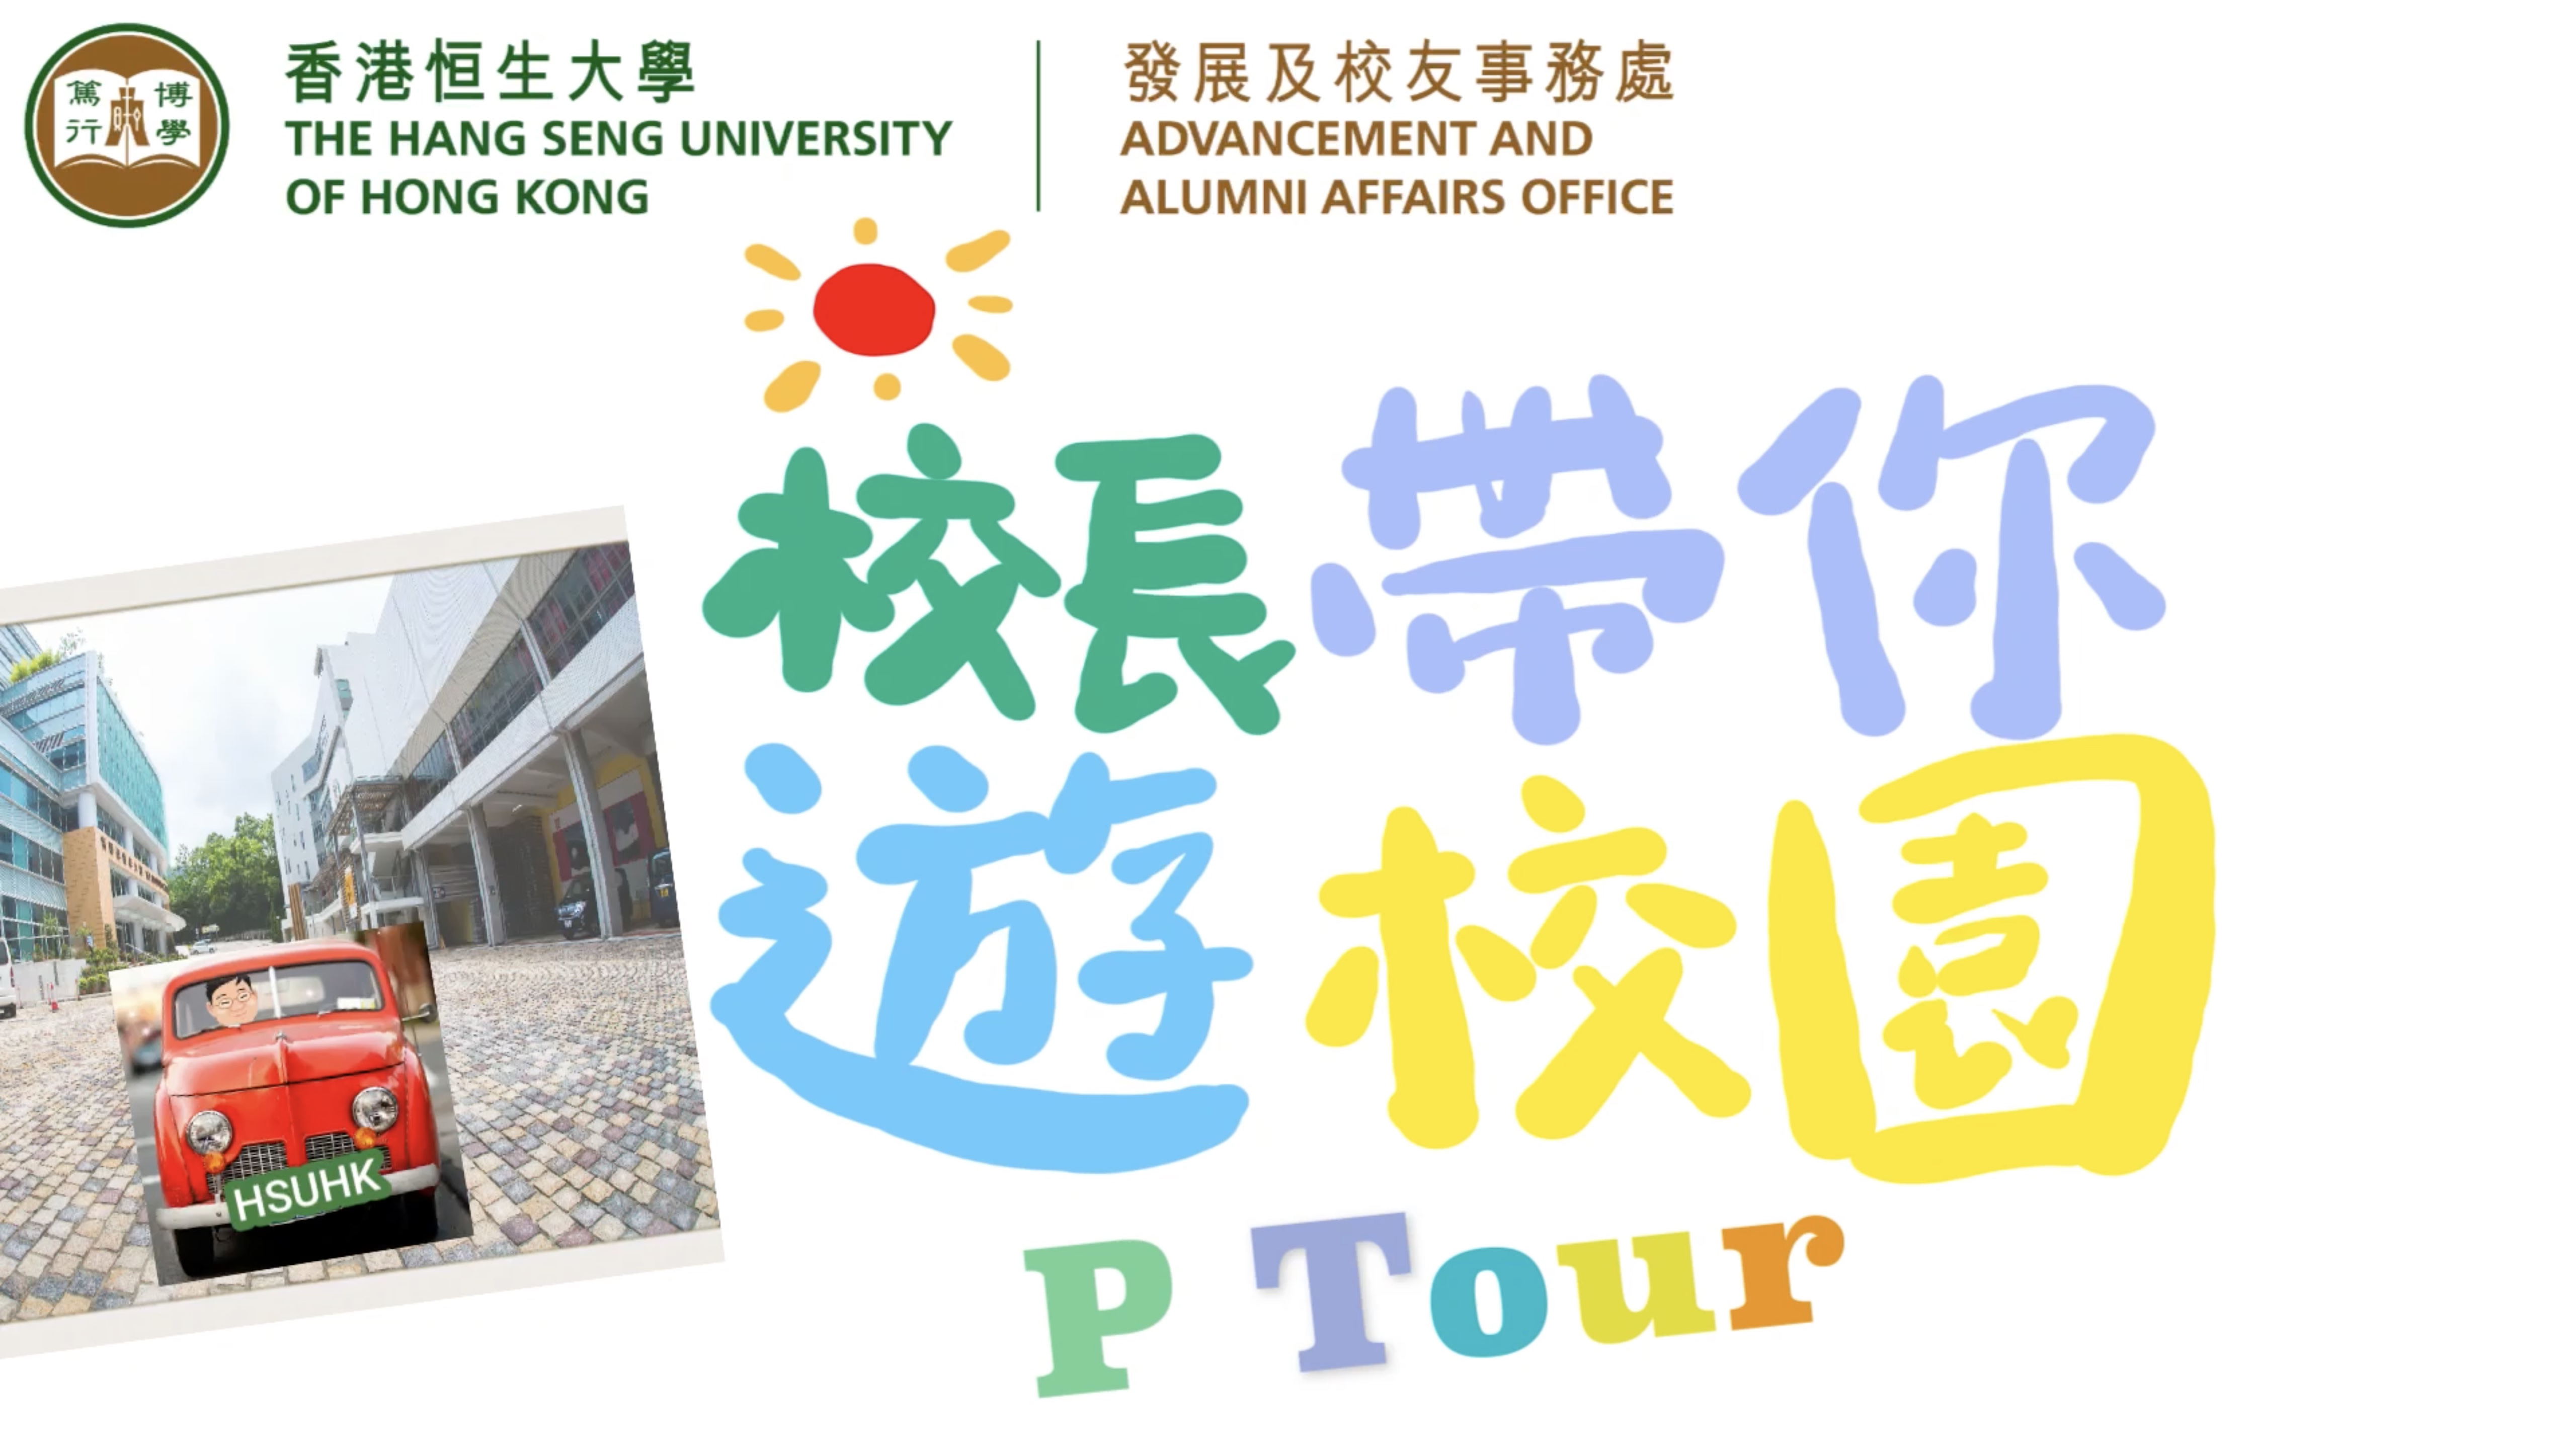 President Simon Ho hosts the 'P Tour' Series (Final episode, released on 29 July 2022)